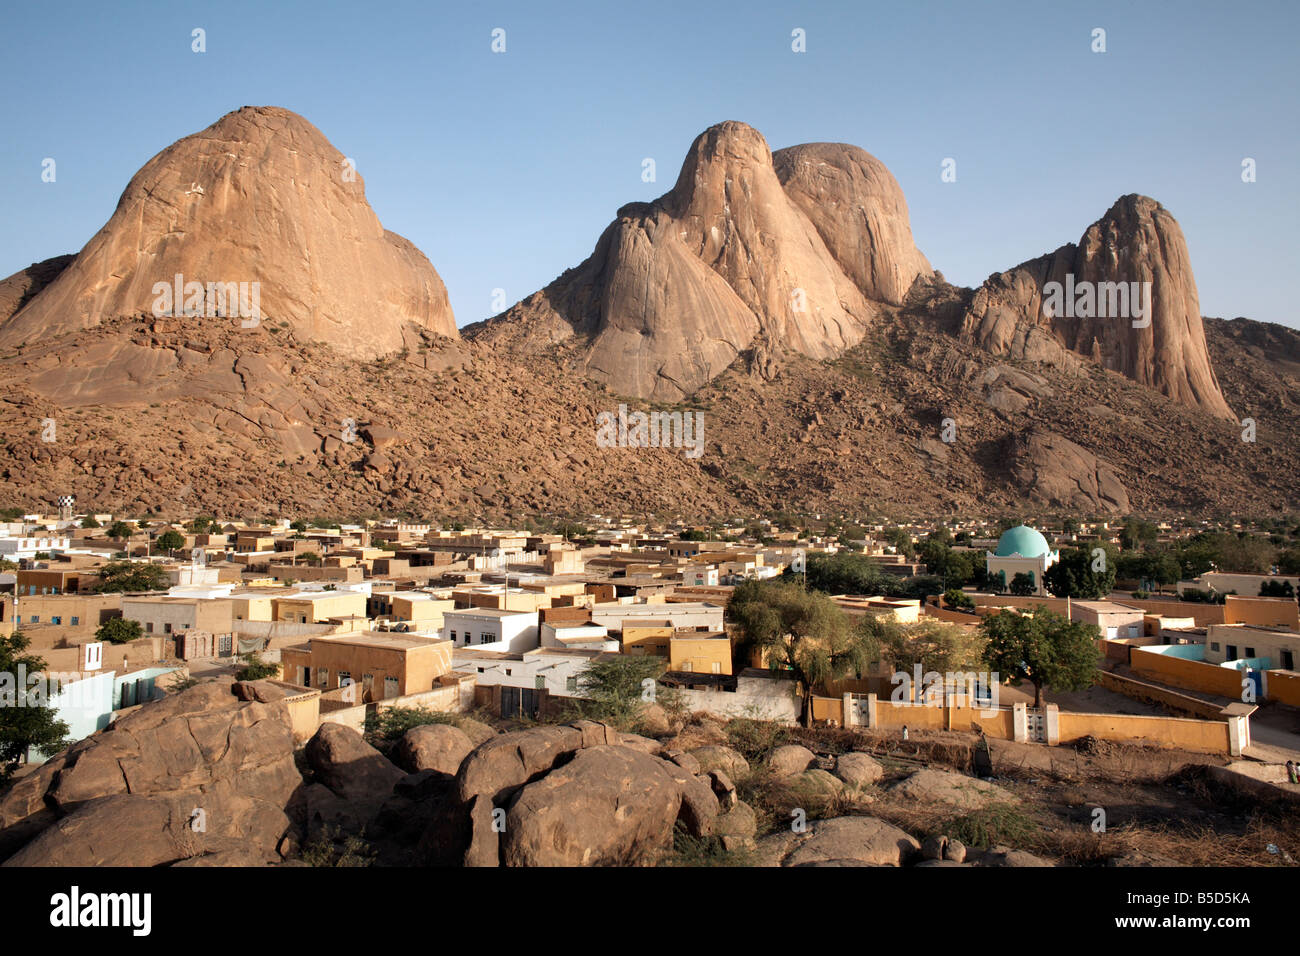 The Taka Mountains and the town of Kassala, Sudan, Africa Stock Photo